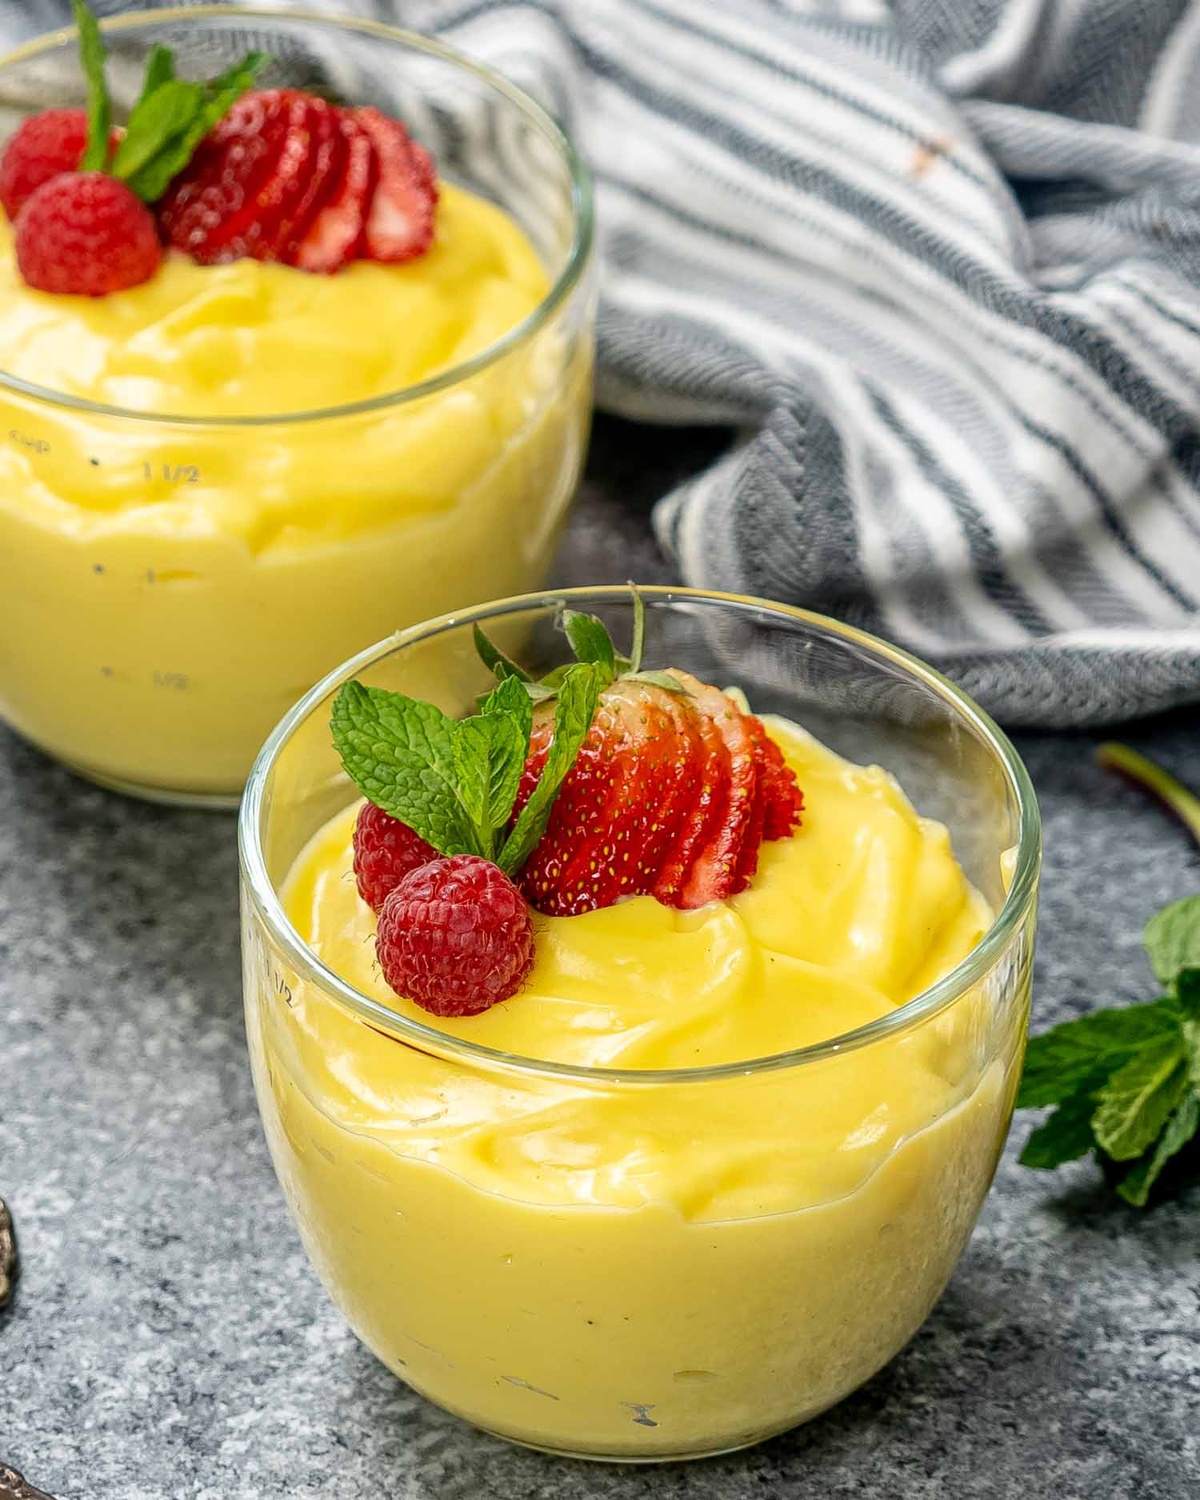 Secondly, homemade custard is much healthier than store-bought